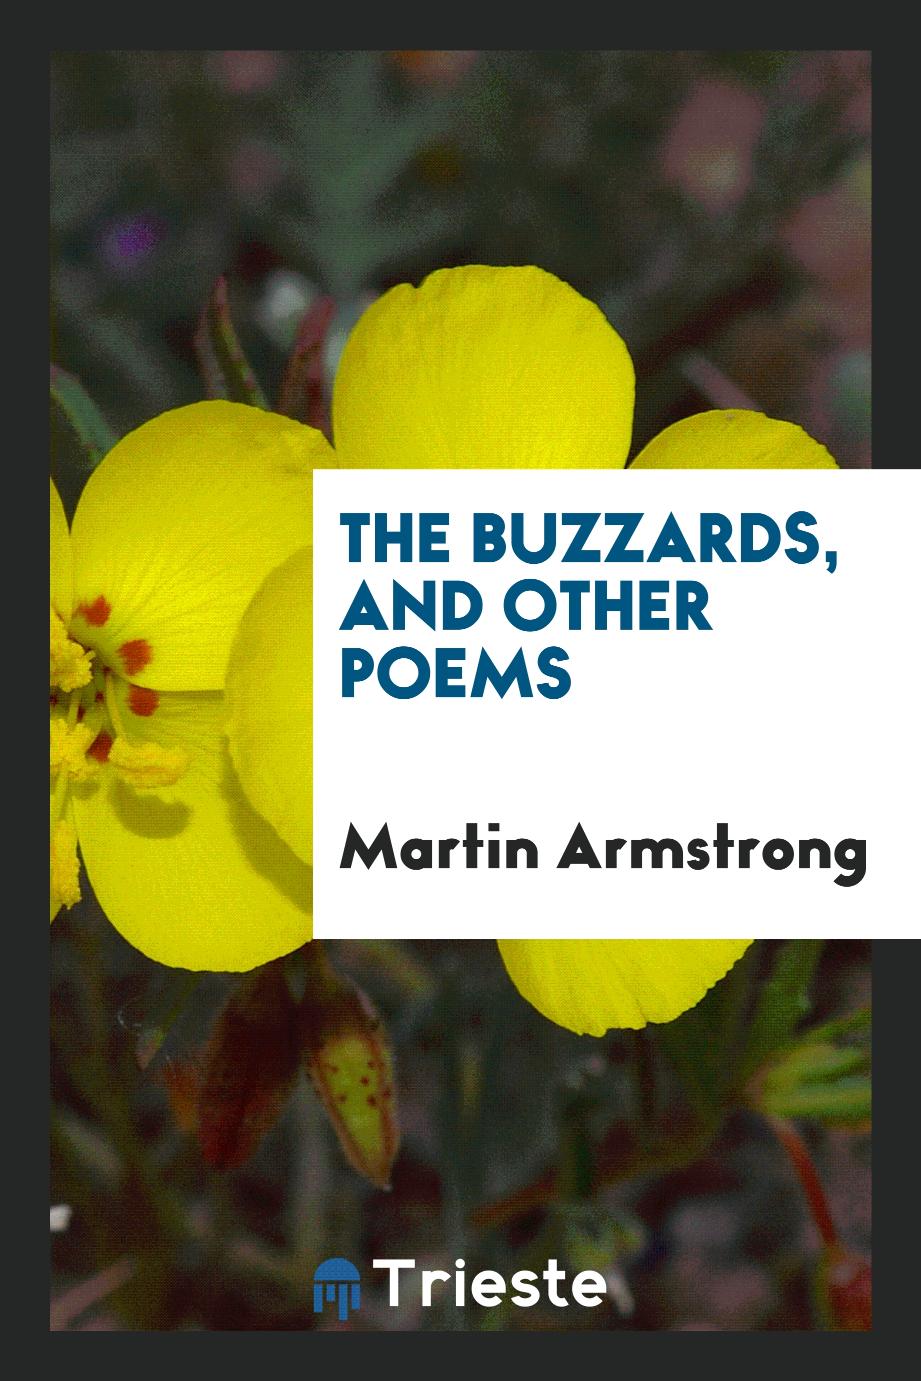 The buzzards, and other poems